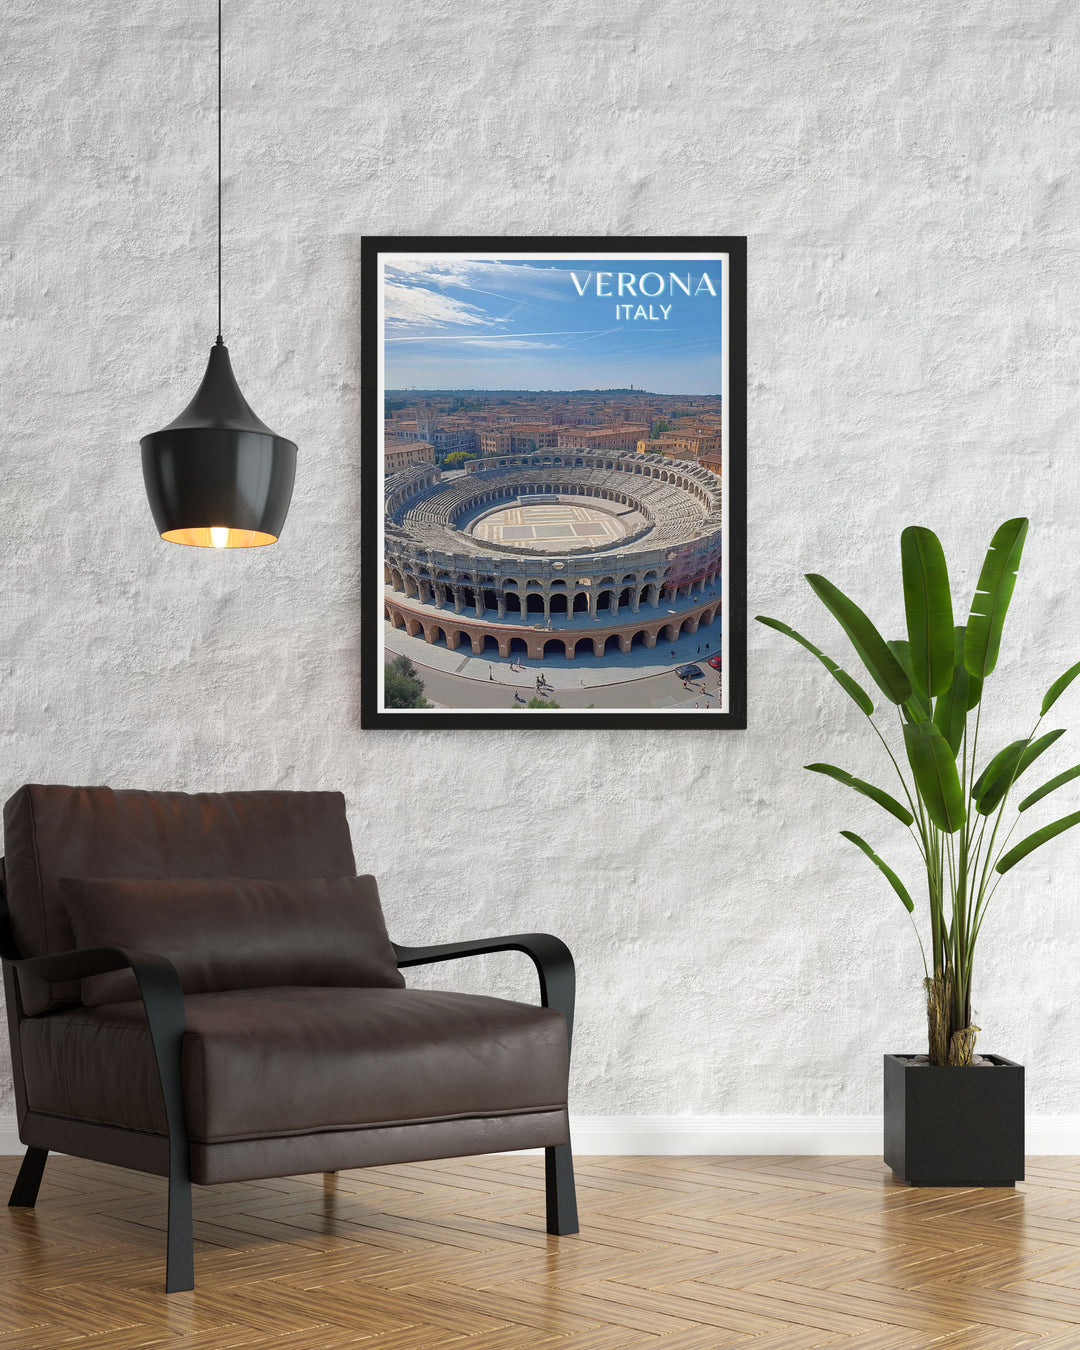 Beautifully crafted Arena de Verona prints capturing the breathtaking views and architectural splendor of this Verona landmark perfect for gifting or enhancing your home decor with a touch of Italian sophistication and history.